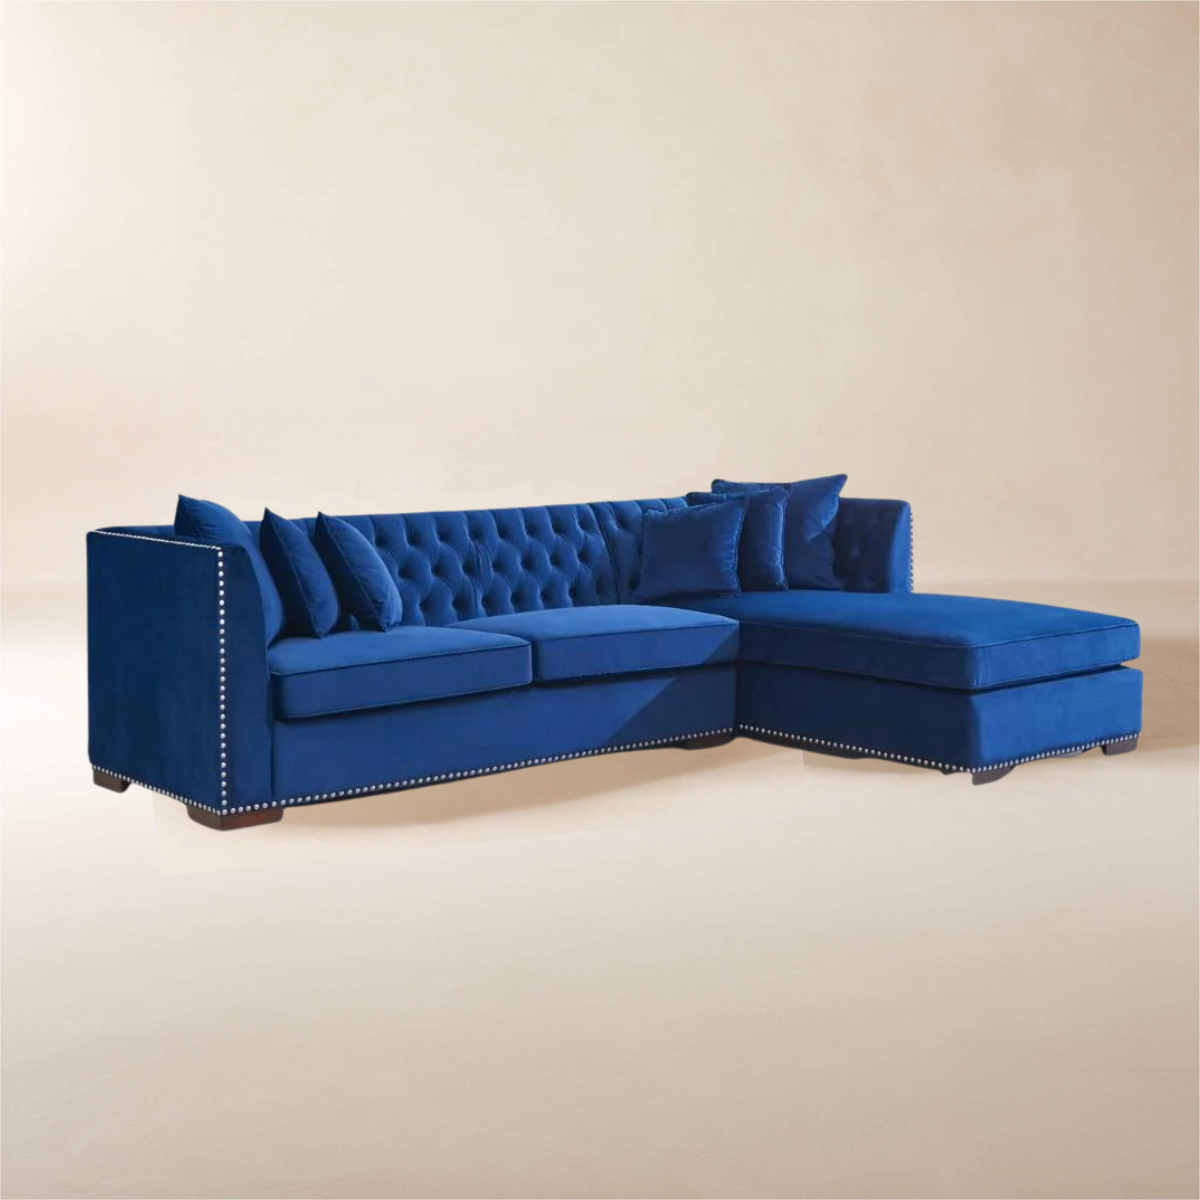 Moscow Royal Blue Corner Suite (right)